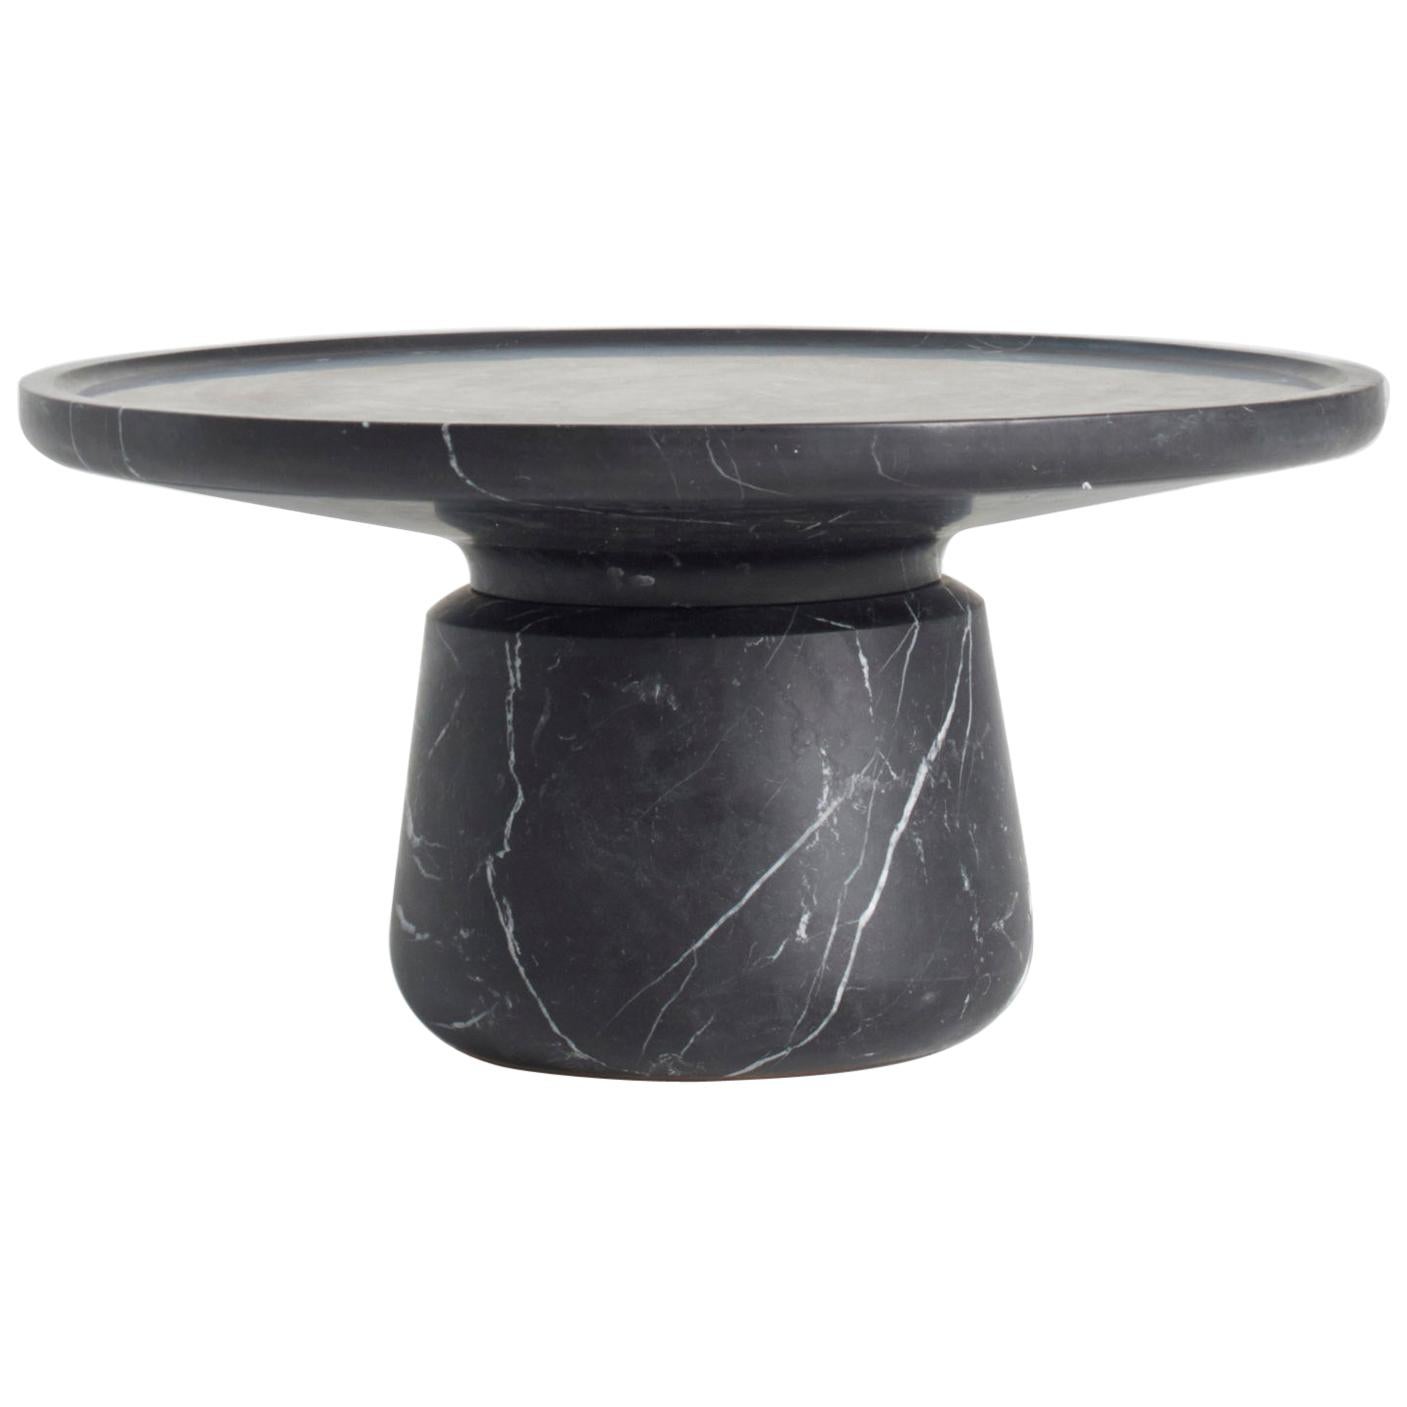 New Modern Side Table in Nero Marquina Marble creator Ivan Colominas